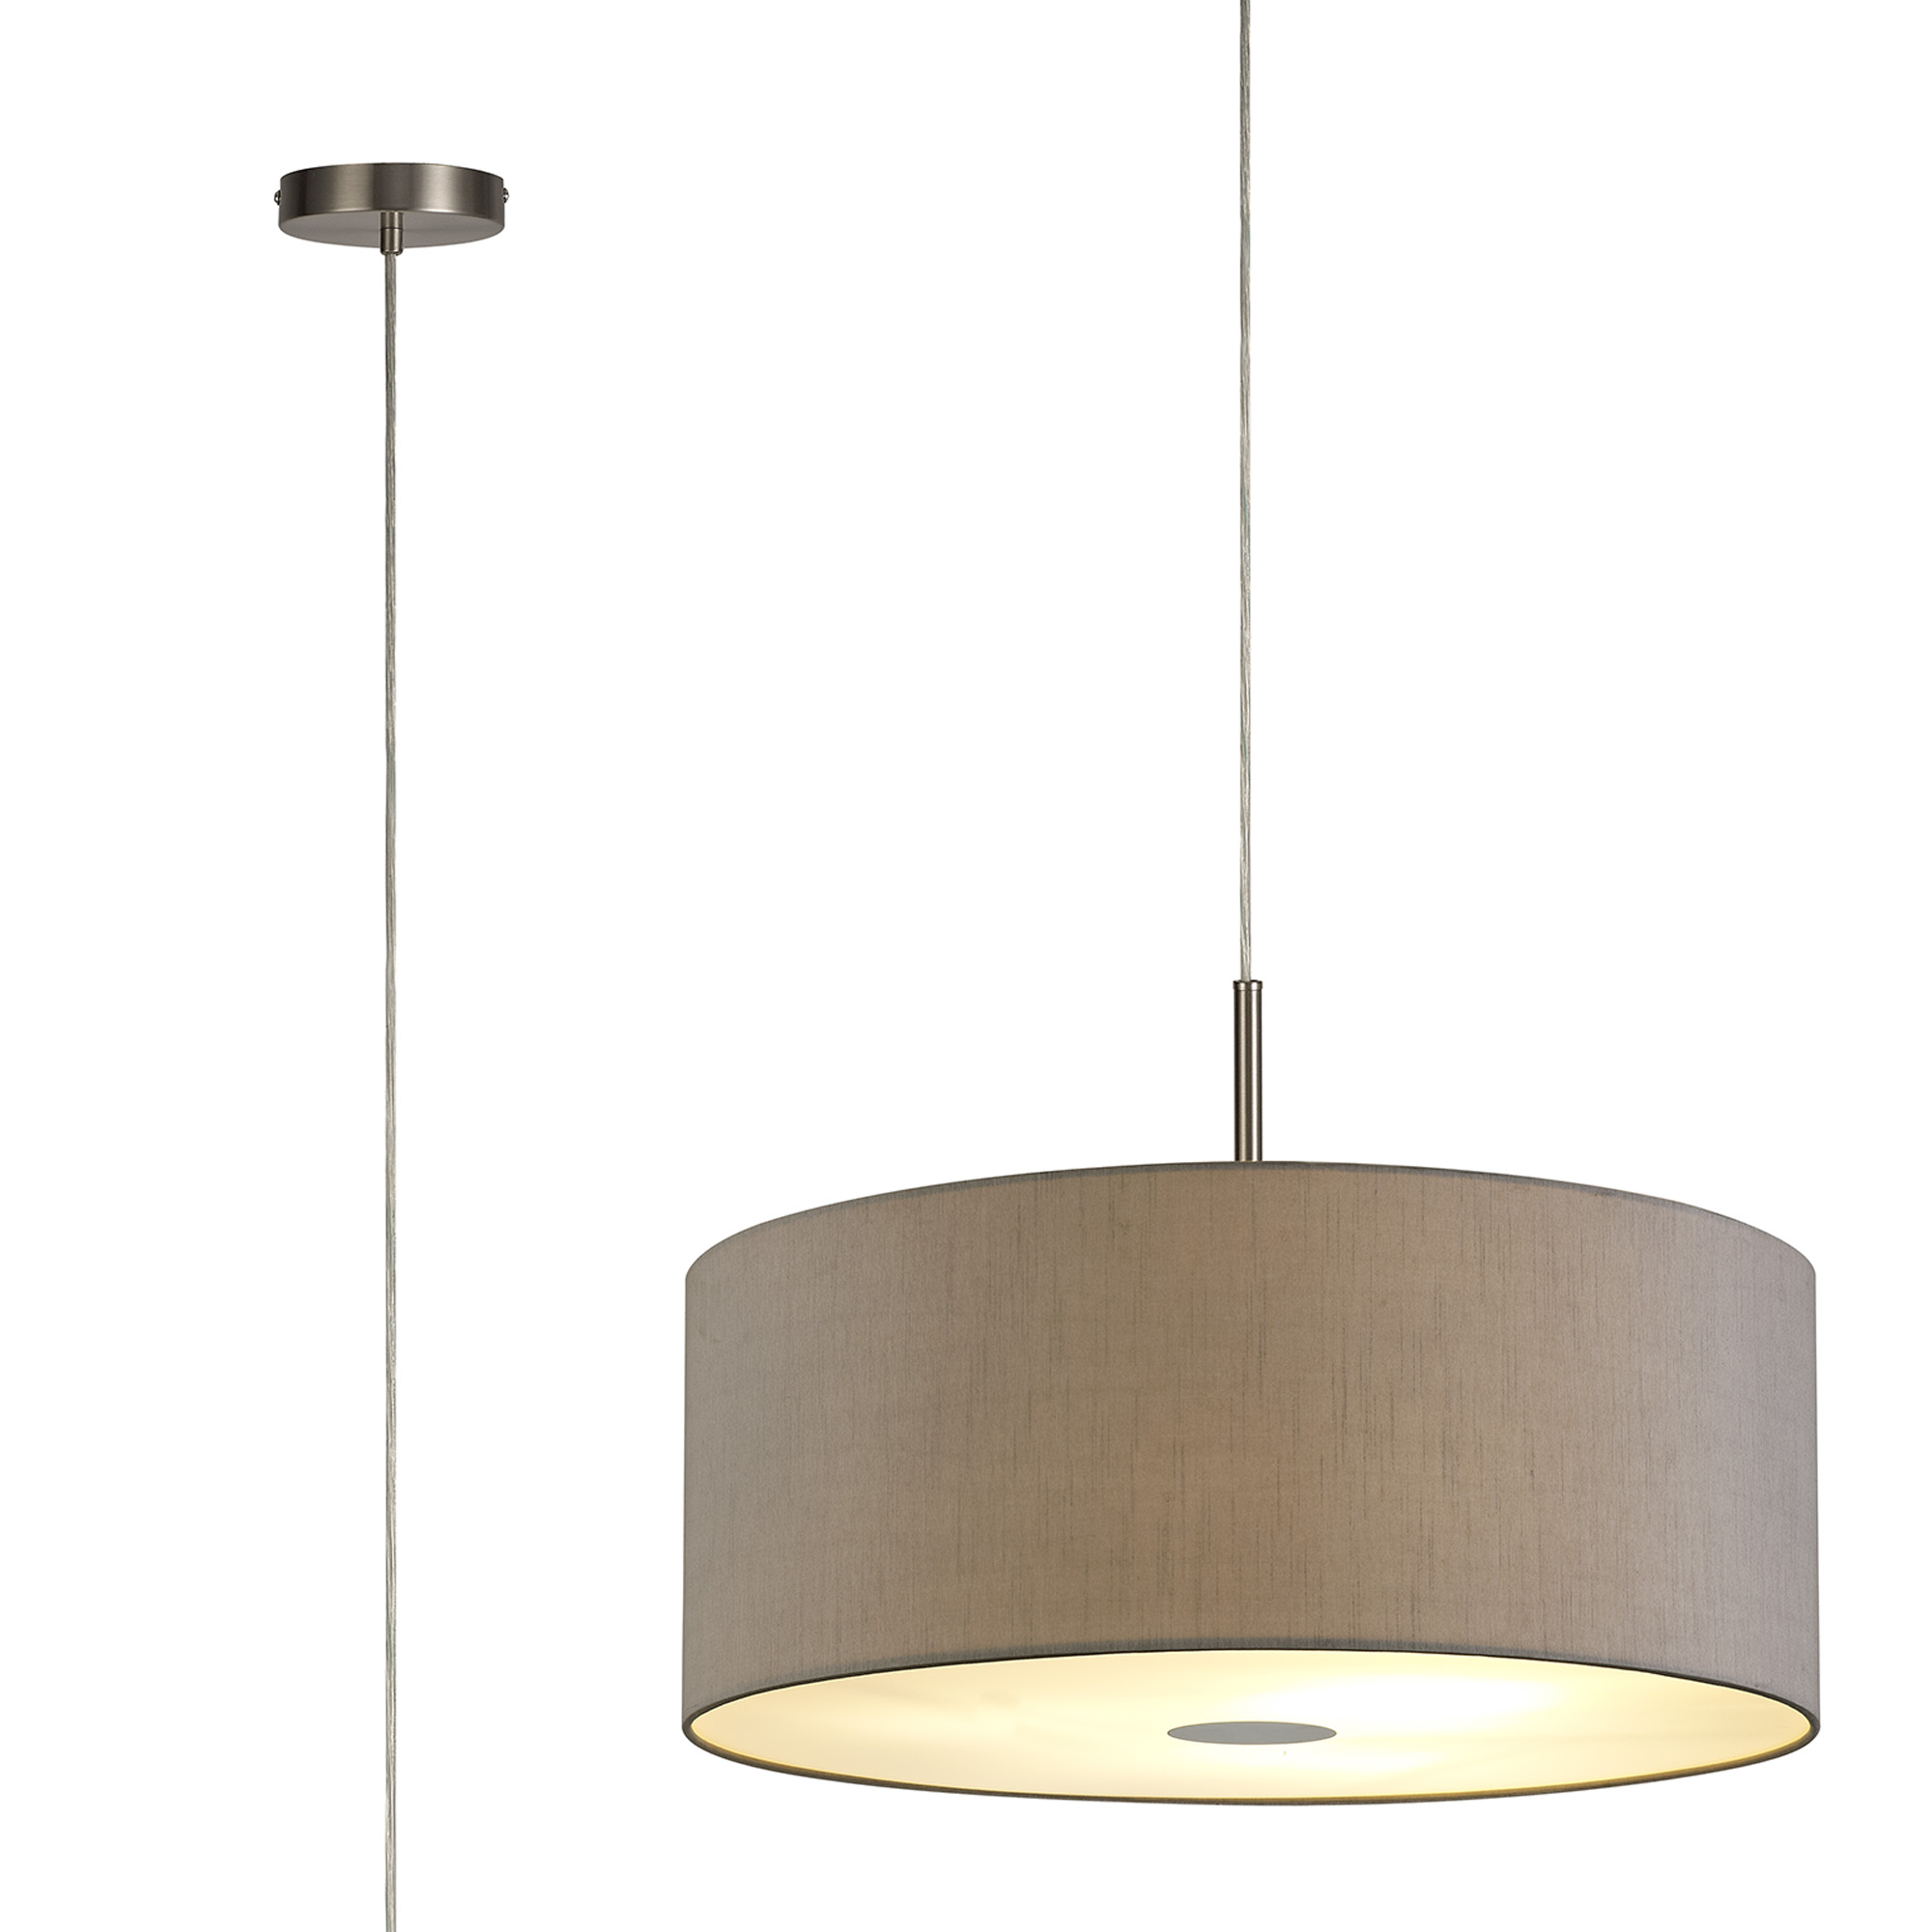 DK0547  Baymont 60cm 5 Light Pendant Satin Nickel, Taupe/Halo Gold, Frosted Diffuser